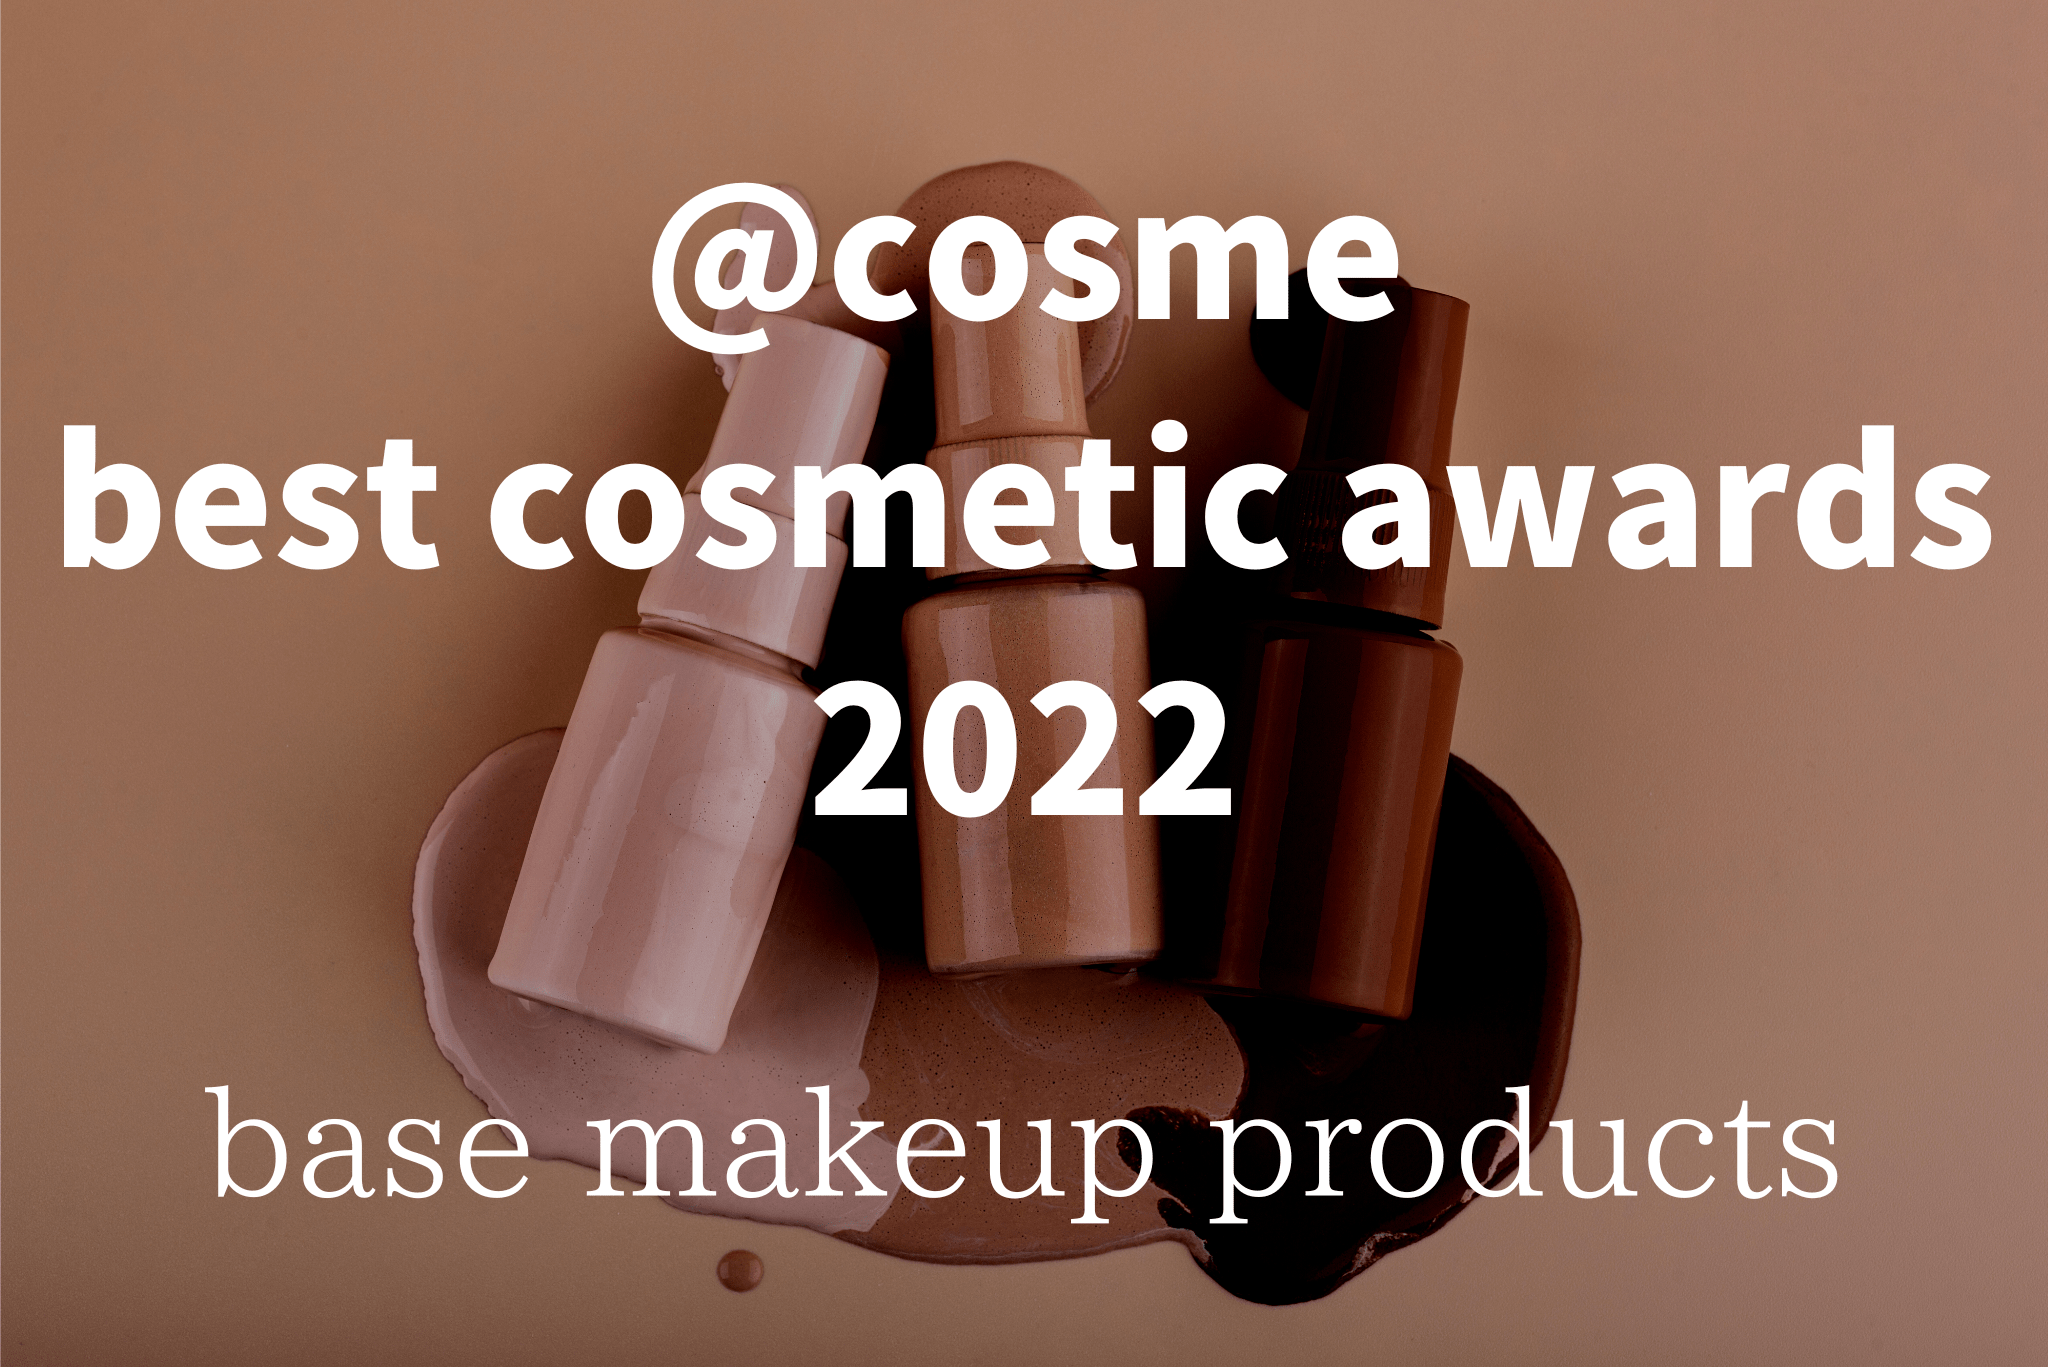 @cosme best cosmetic awards 2022 base makeup products-min